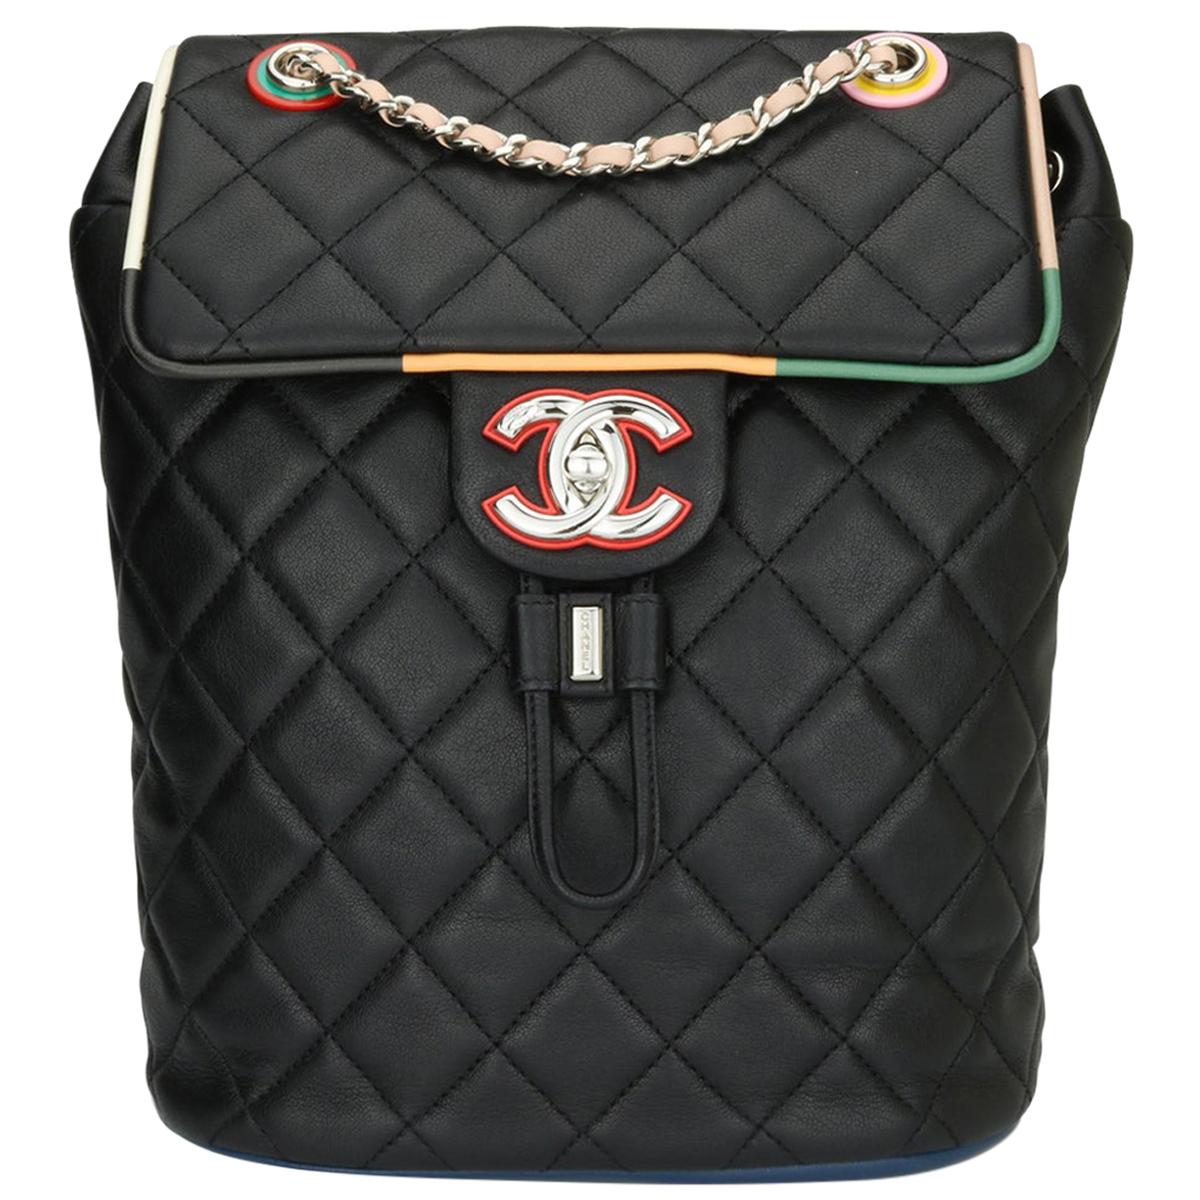 CHANEL Cuba Backpack Small Black Multicolour Lambskin with Silver Hardware 2017